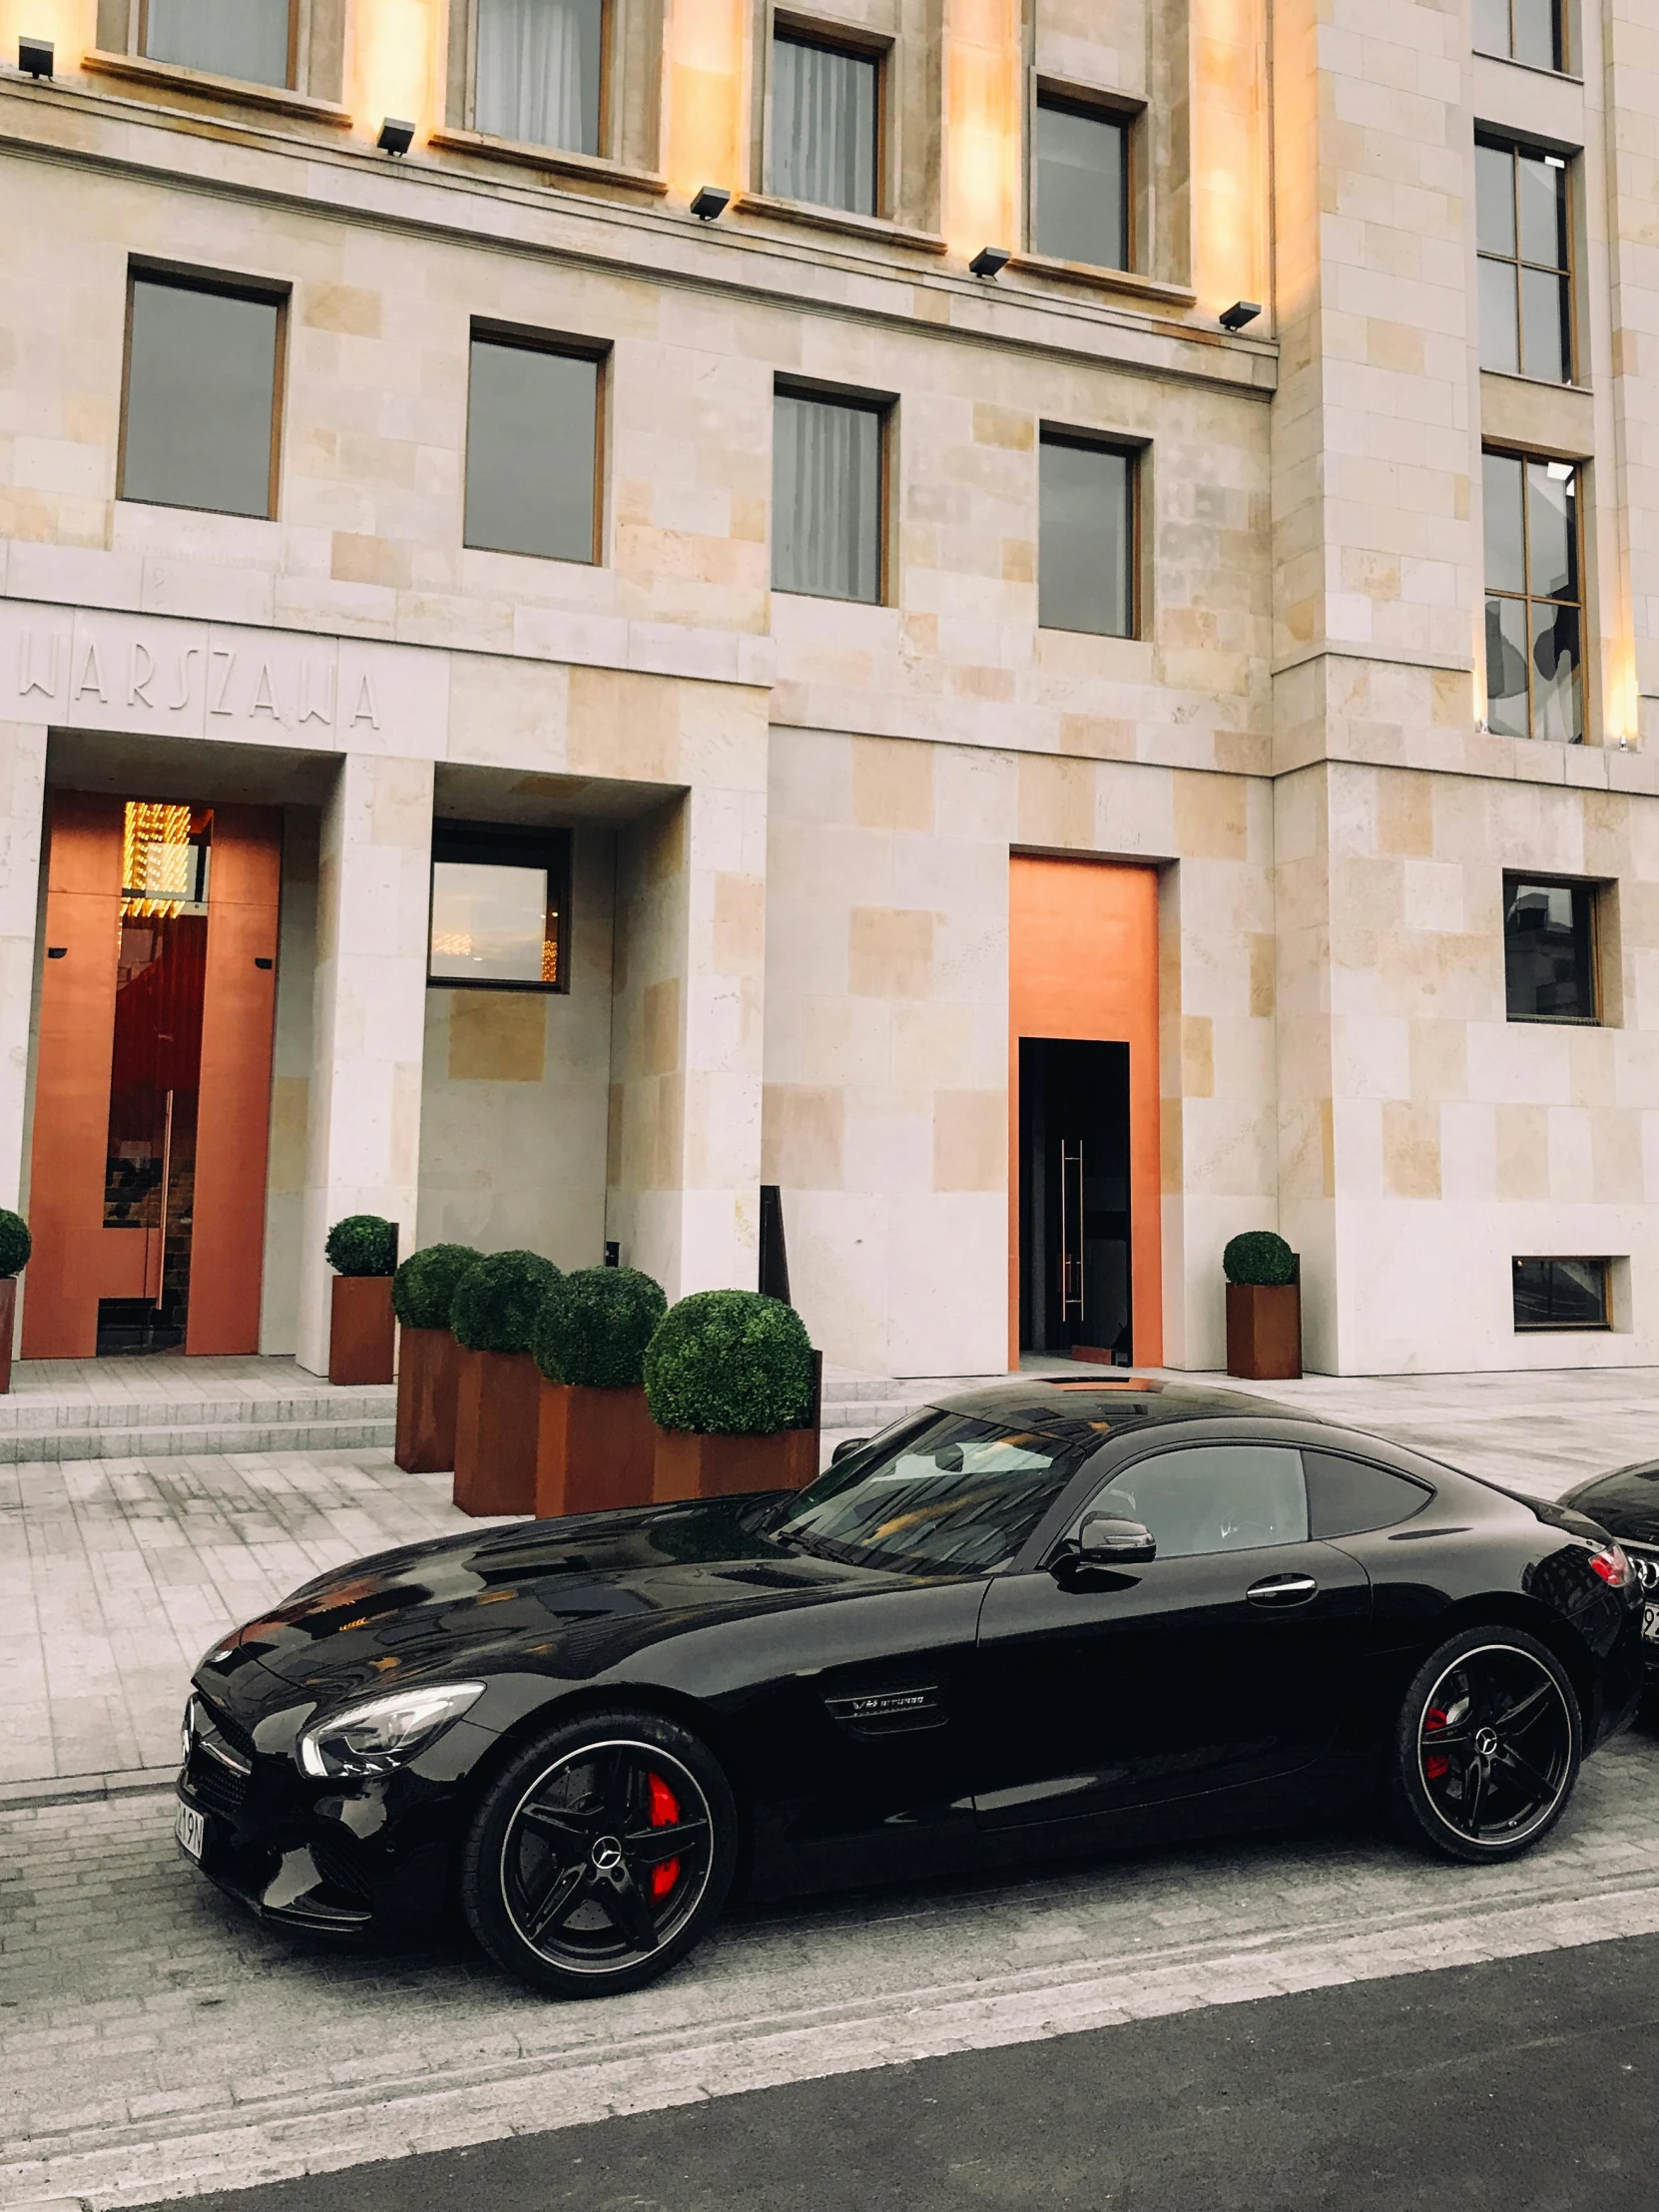 two black sports cars parked in front of a building, 🚿🗝📝, bulgari, mercedez benz, vienna city